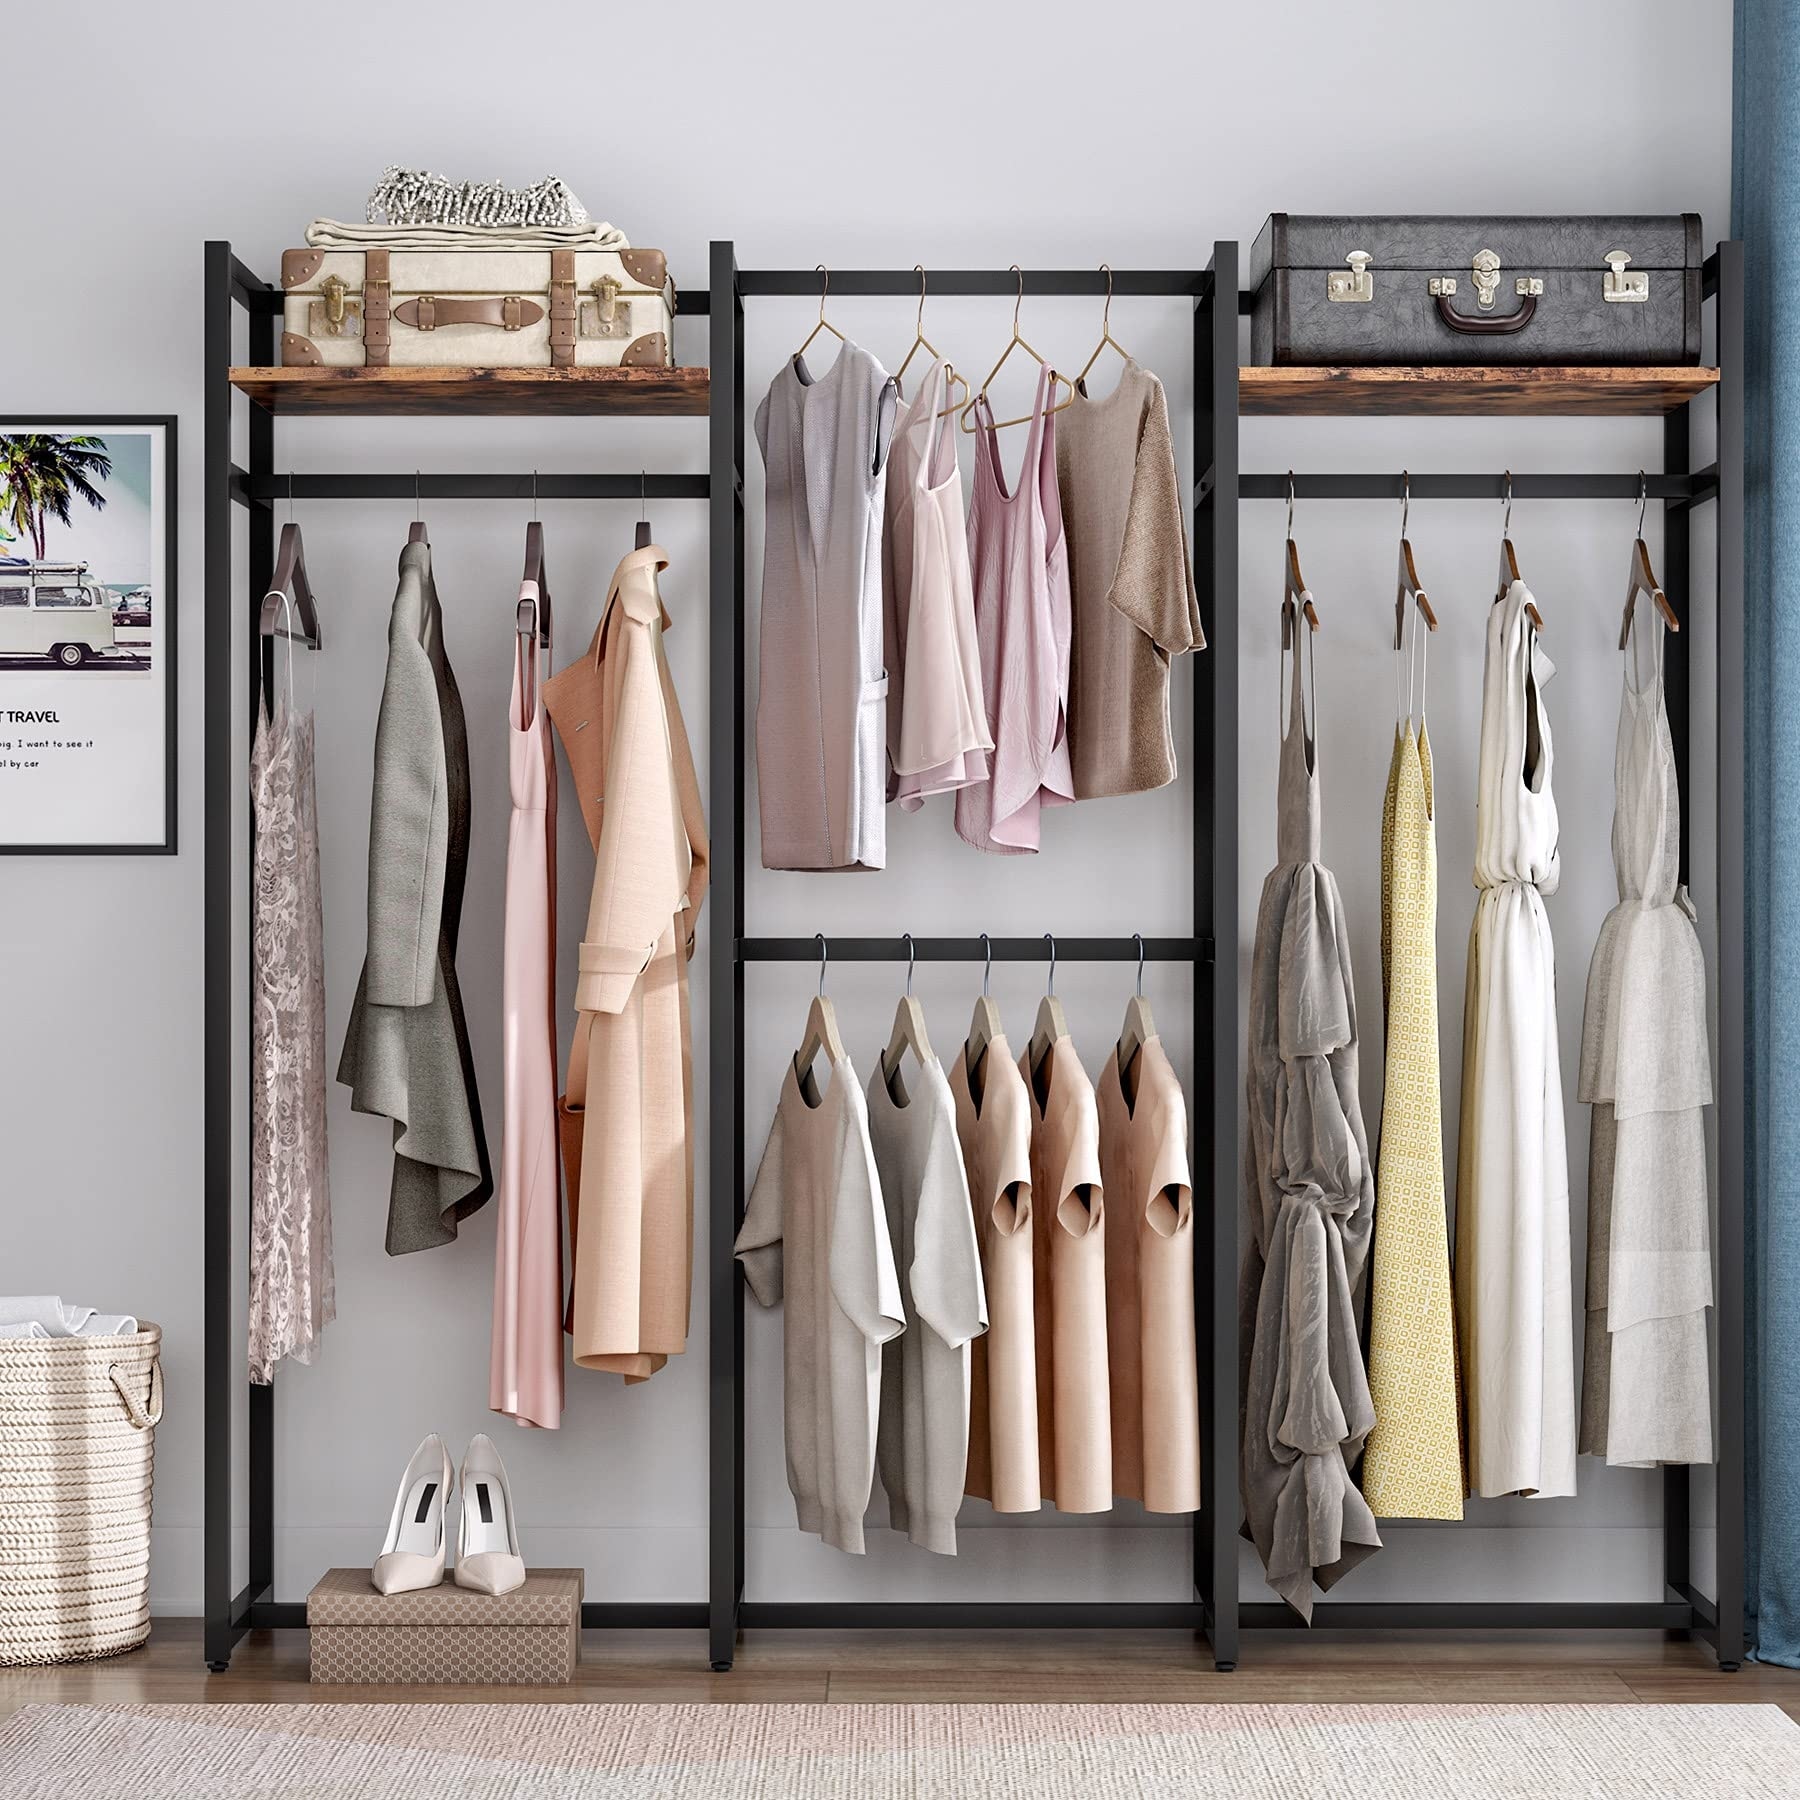 https://ak1.ostkcdn.com/images/products/is/images/direct/f188d7c4e810de4bd43c9cc6df43e7681381db46/Garment-Rack-Heavy-Duty-Clothes-Rack-Free-Standing-Closet-Organizer-with-Shelves%2C-Large-Size-Storage-Rack-with-4-hanging-Rods.jpg